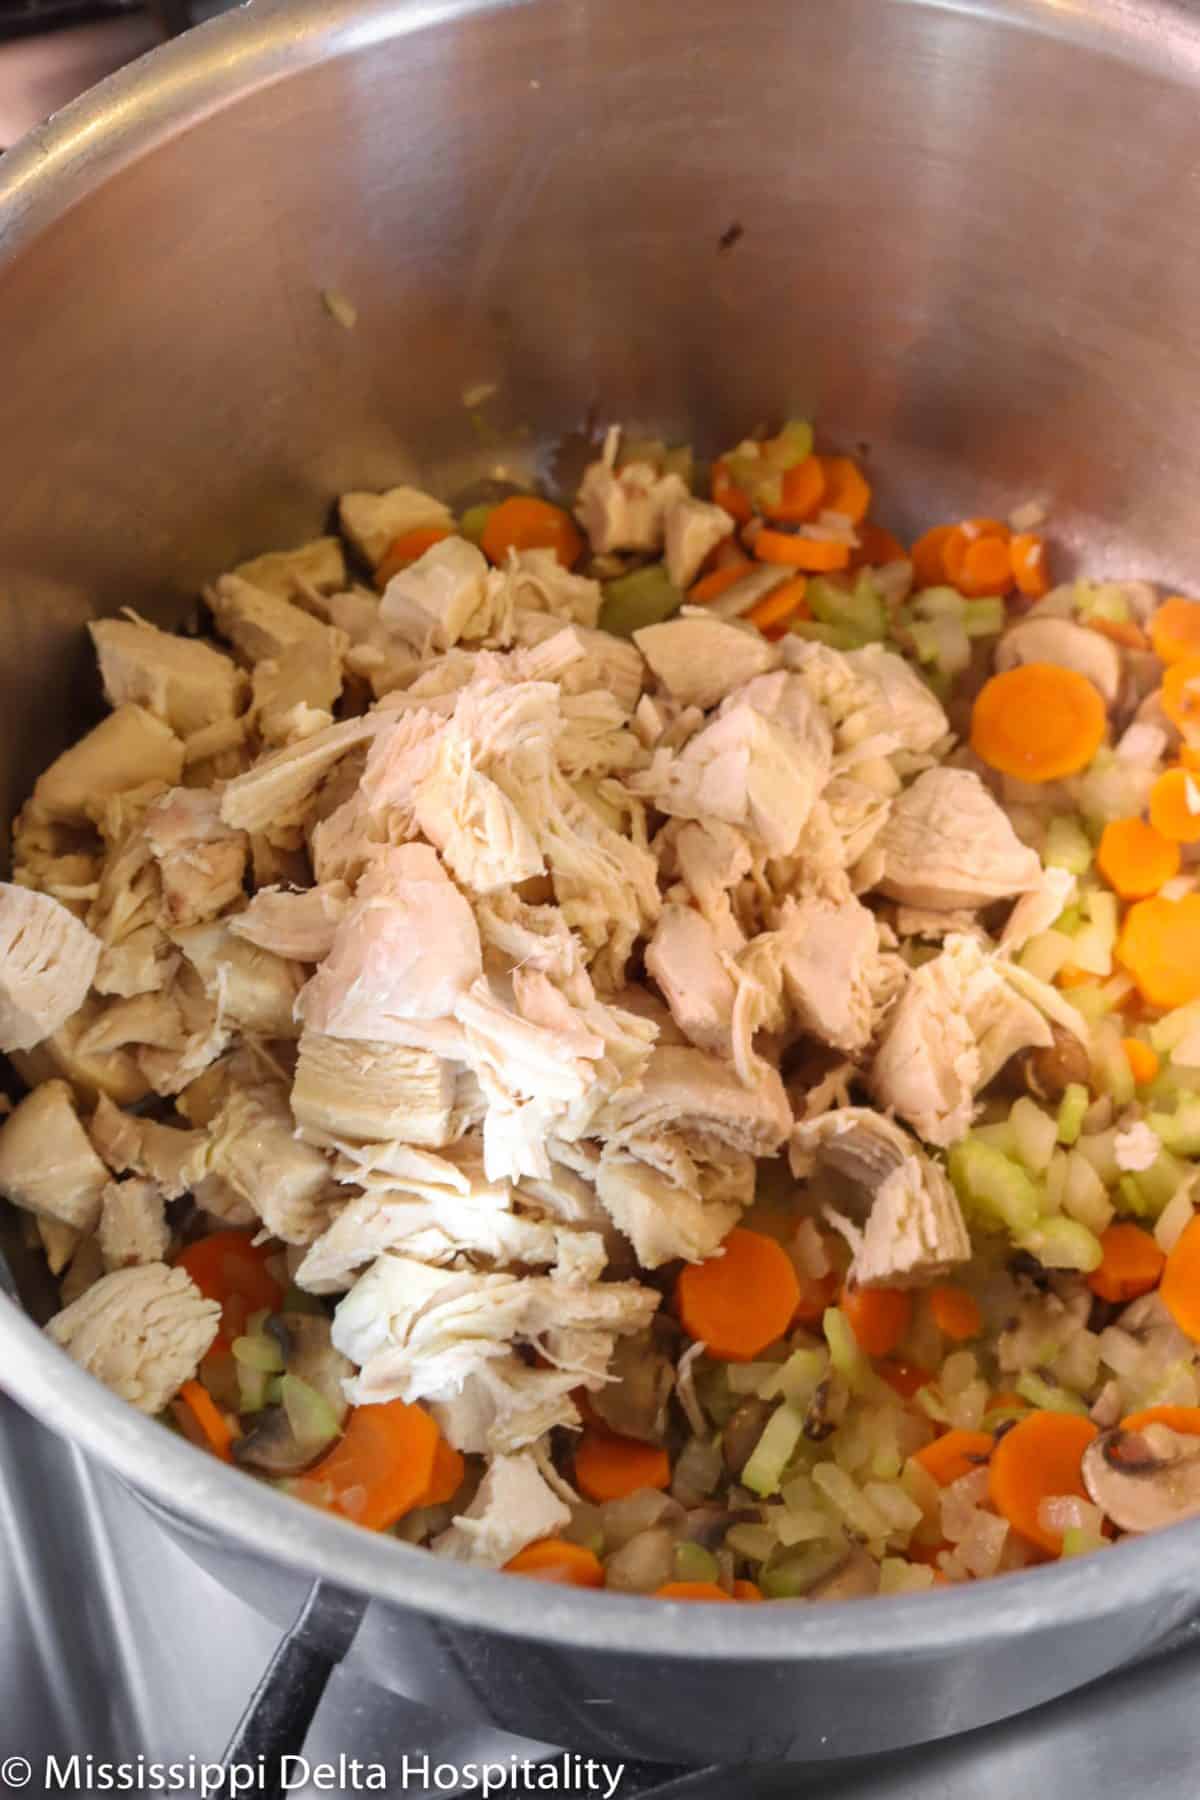 chicken added to vegetable mix